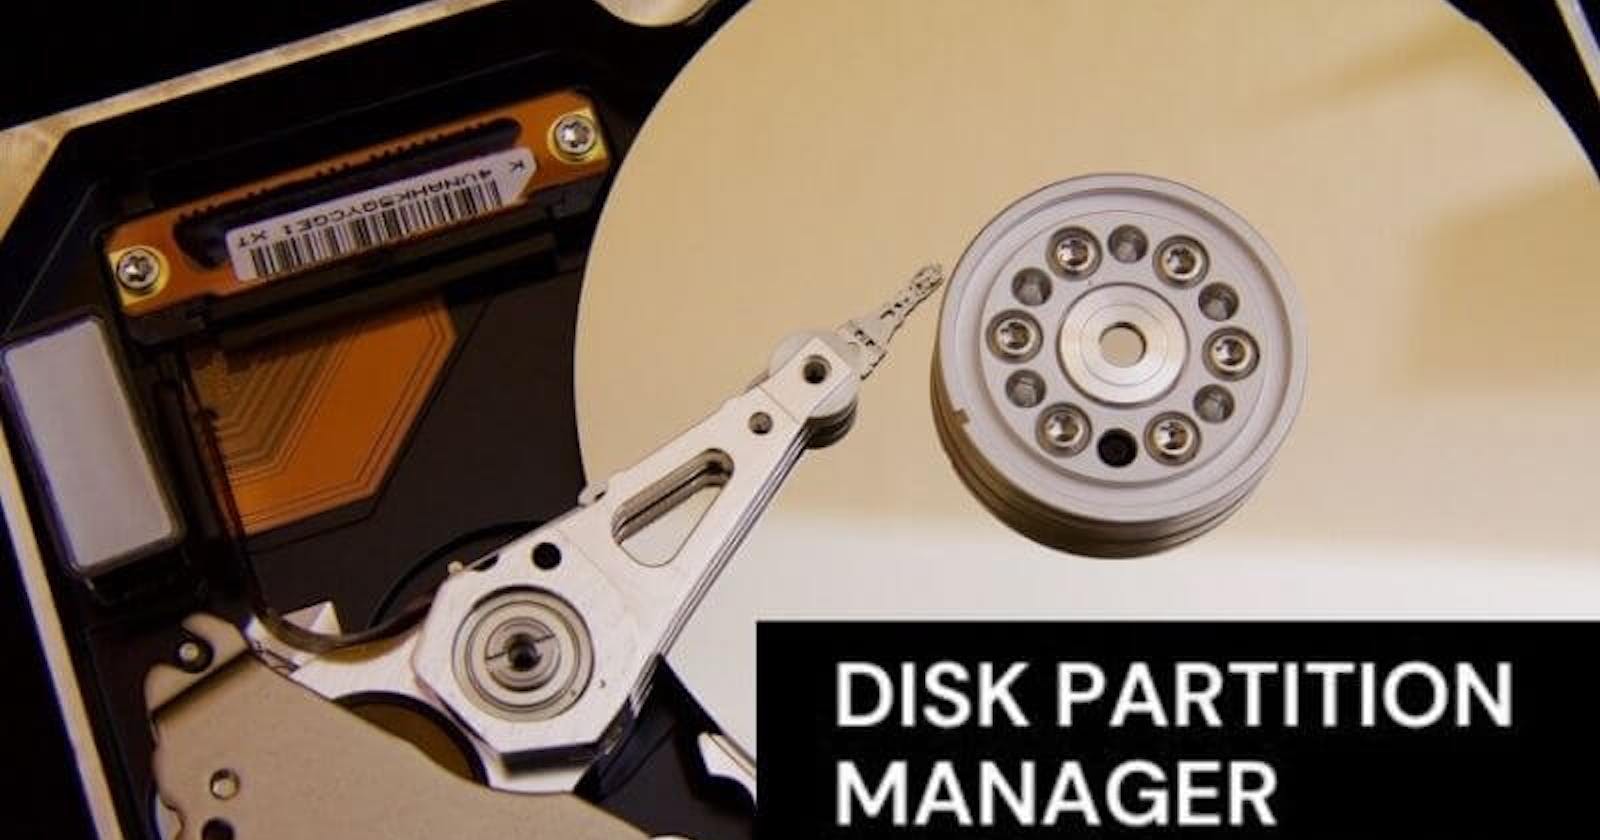 10 Best Free Disk Partition Software For Windows 11 in 2022